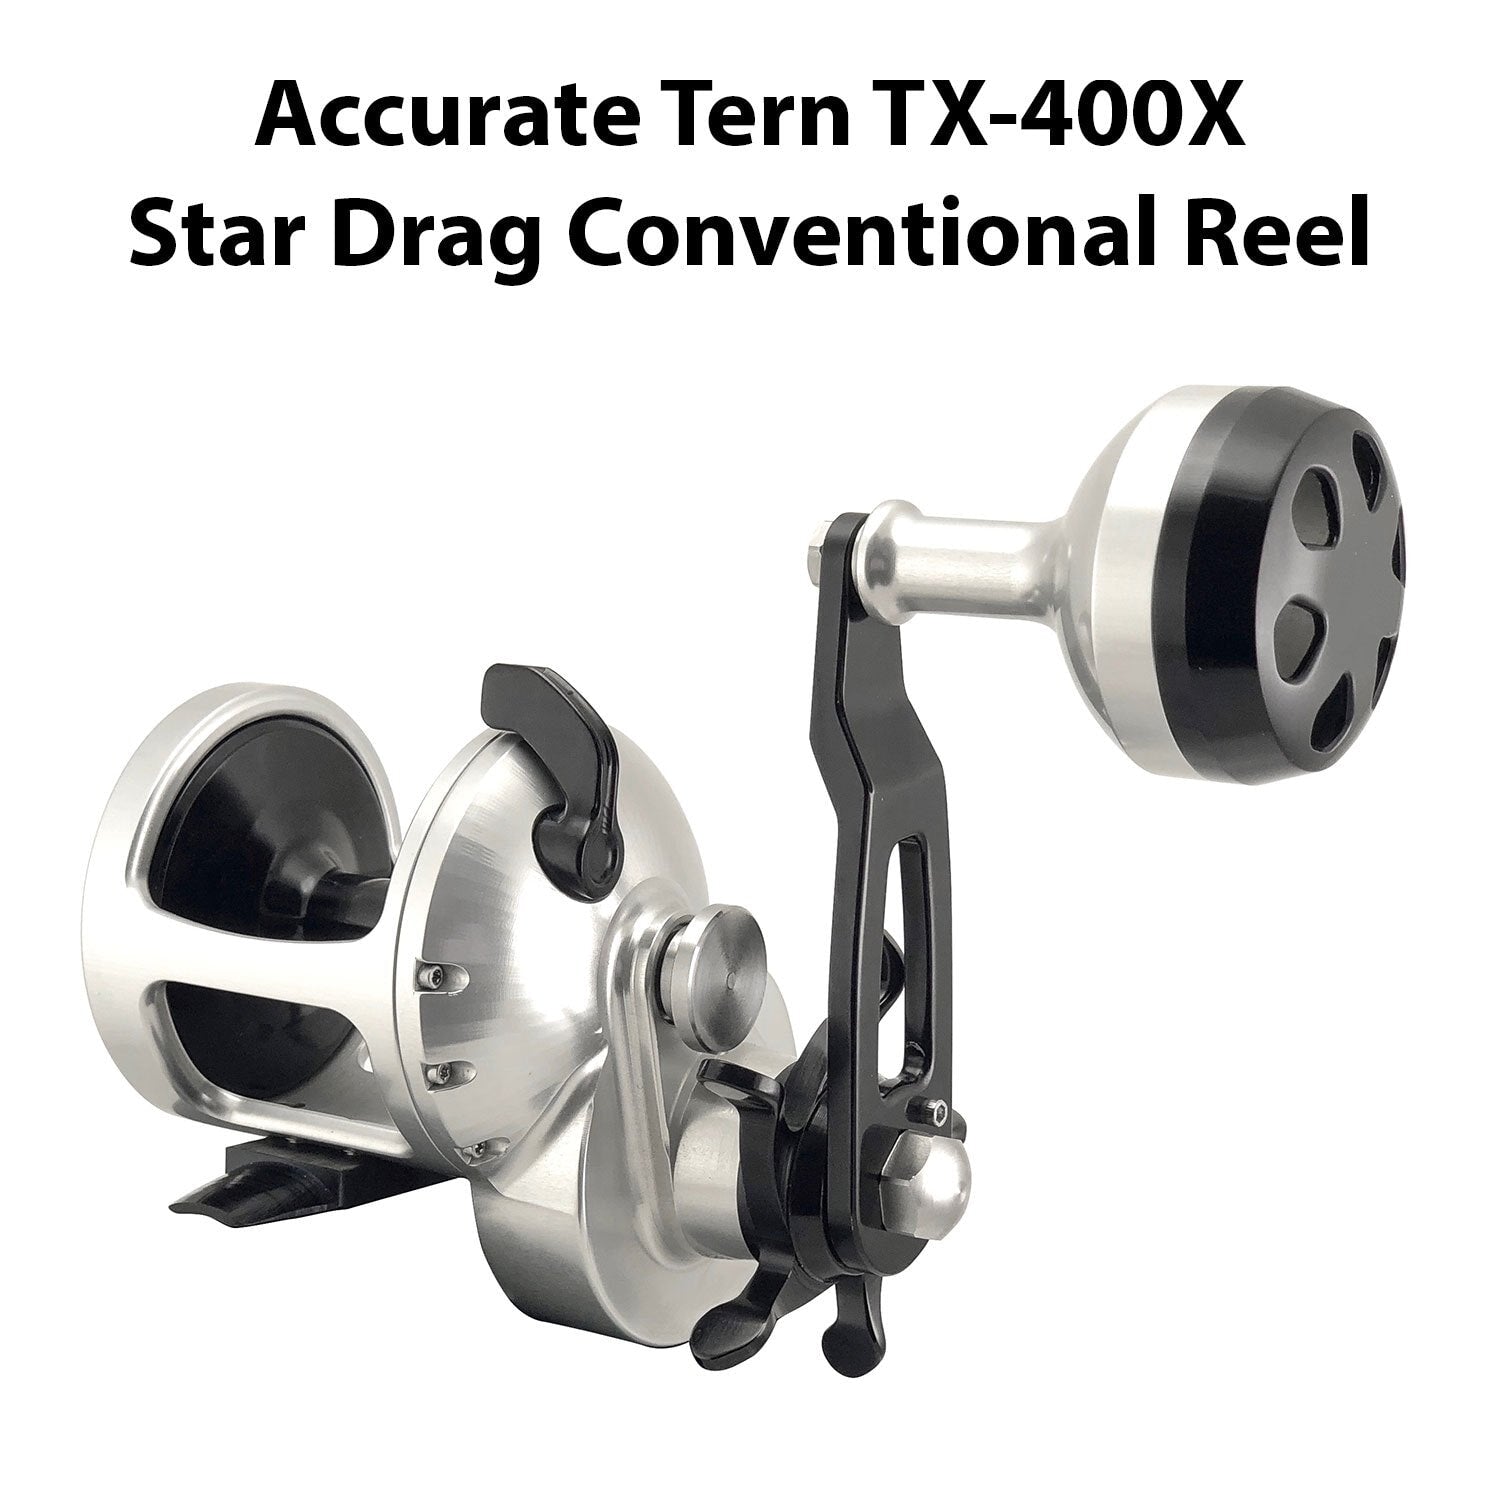 Accurate Tern Star Drag Conventional Reel - TX-400X